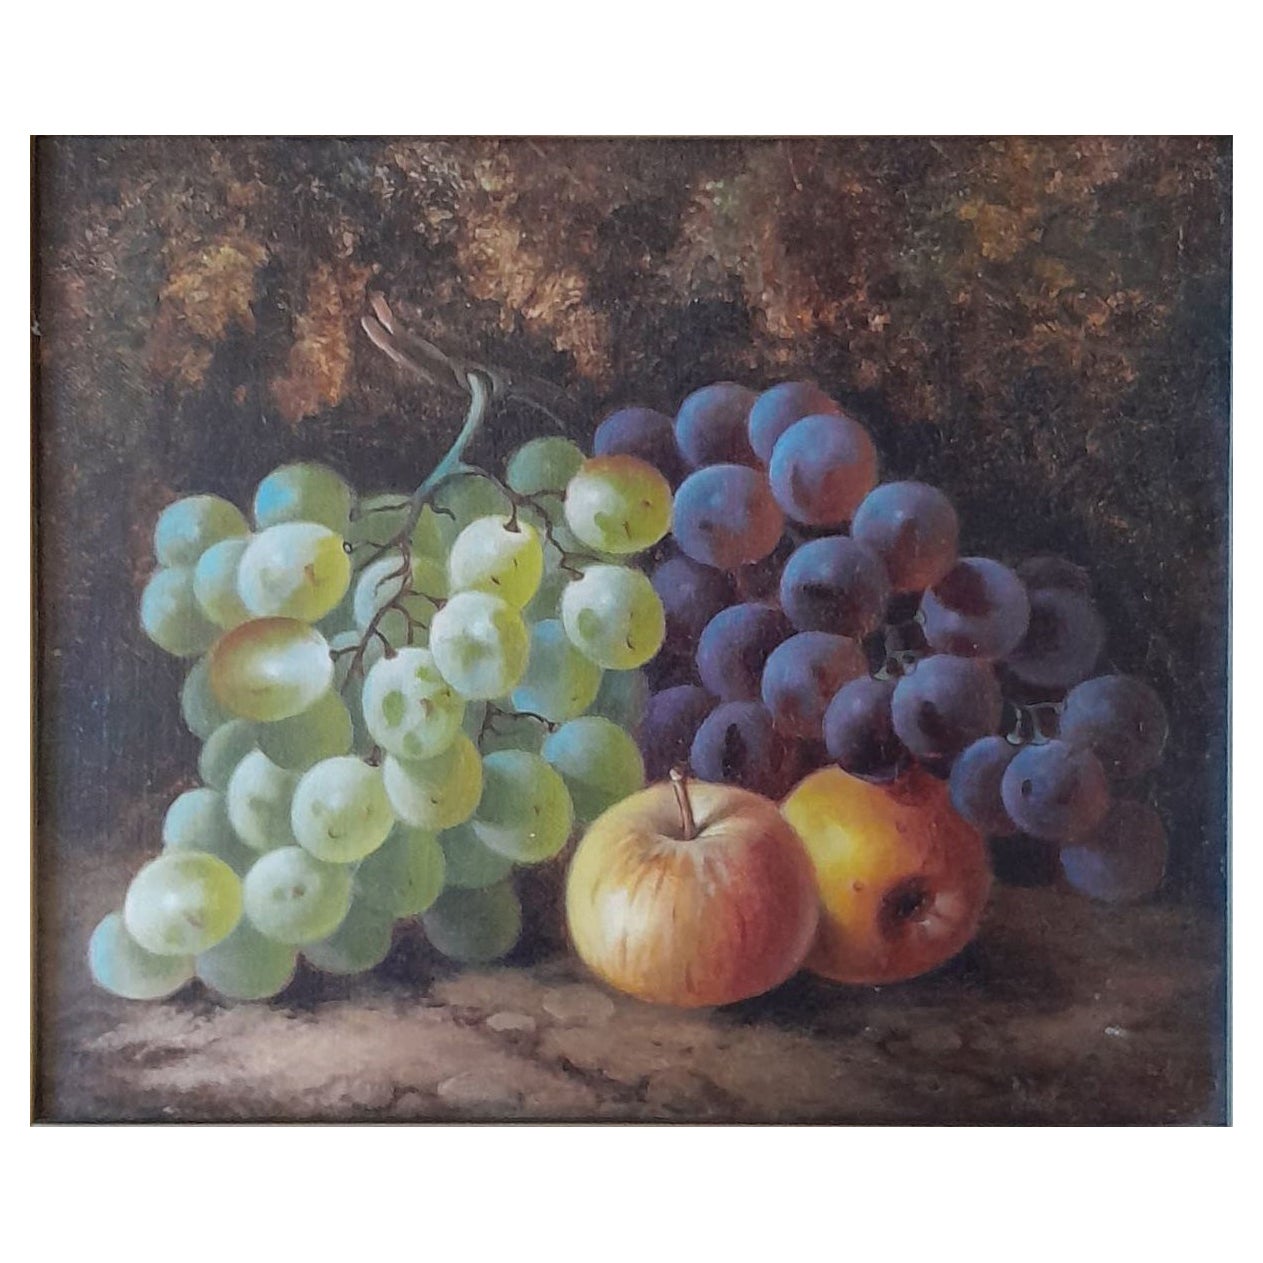 Late 19th Century Oil on Canvas Painting Entitled "Still Life" by Oliver Clare